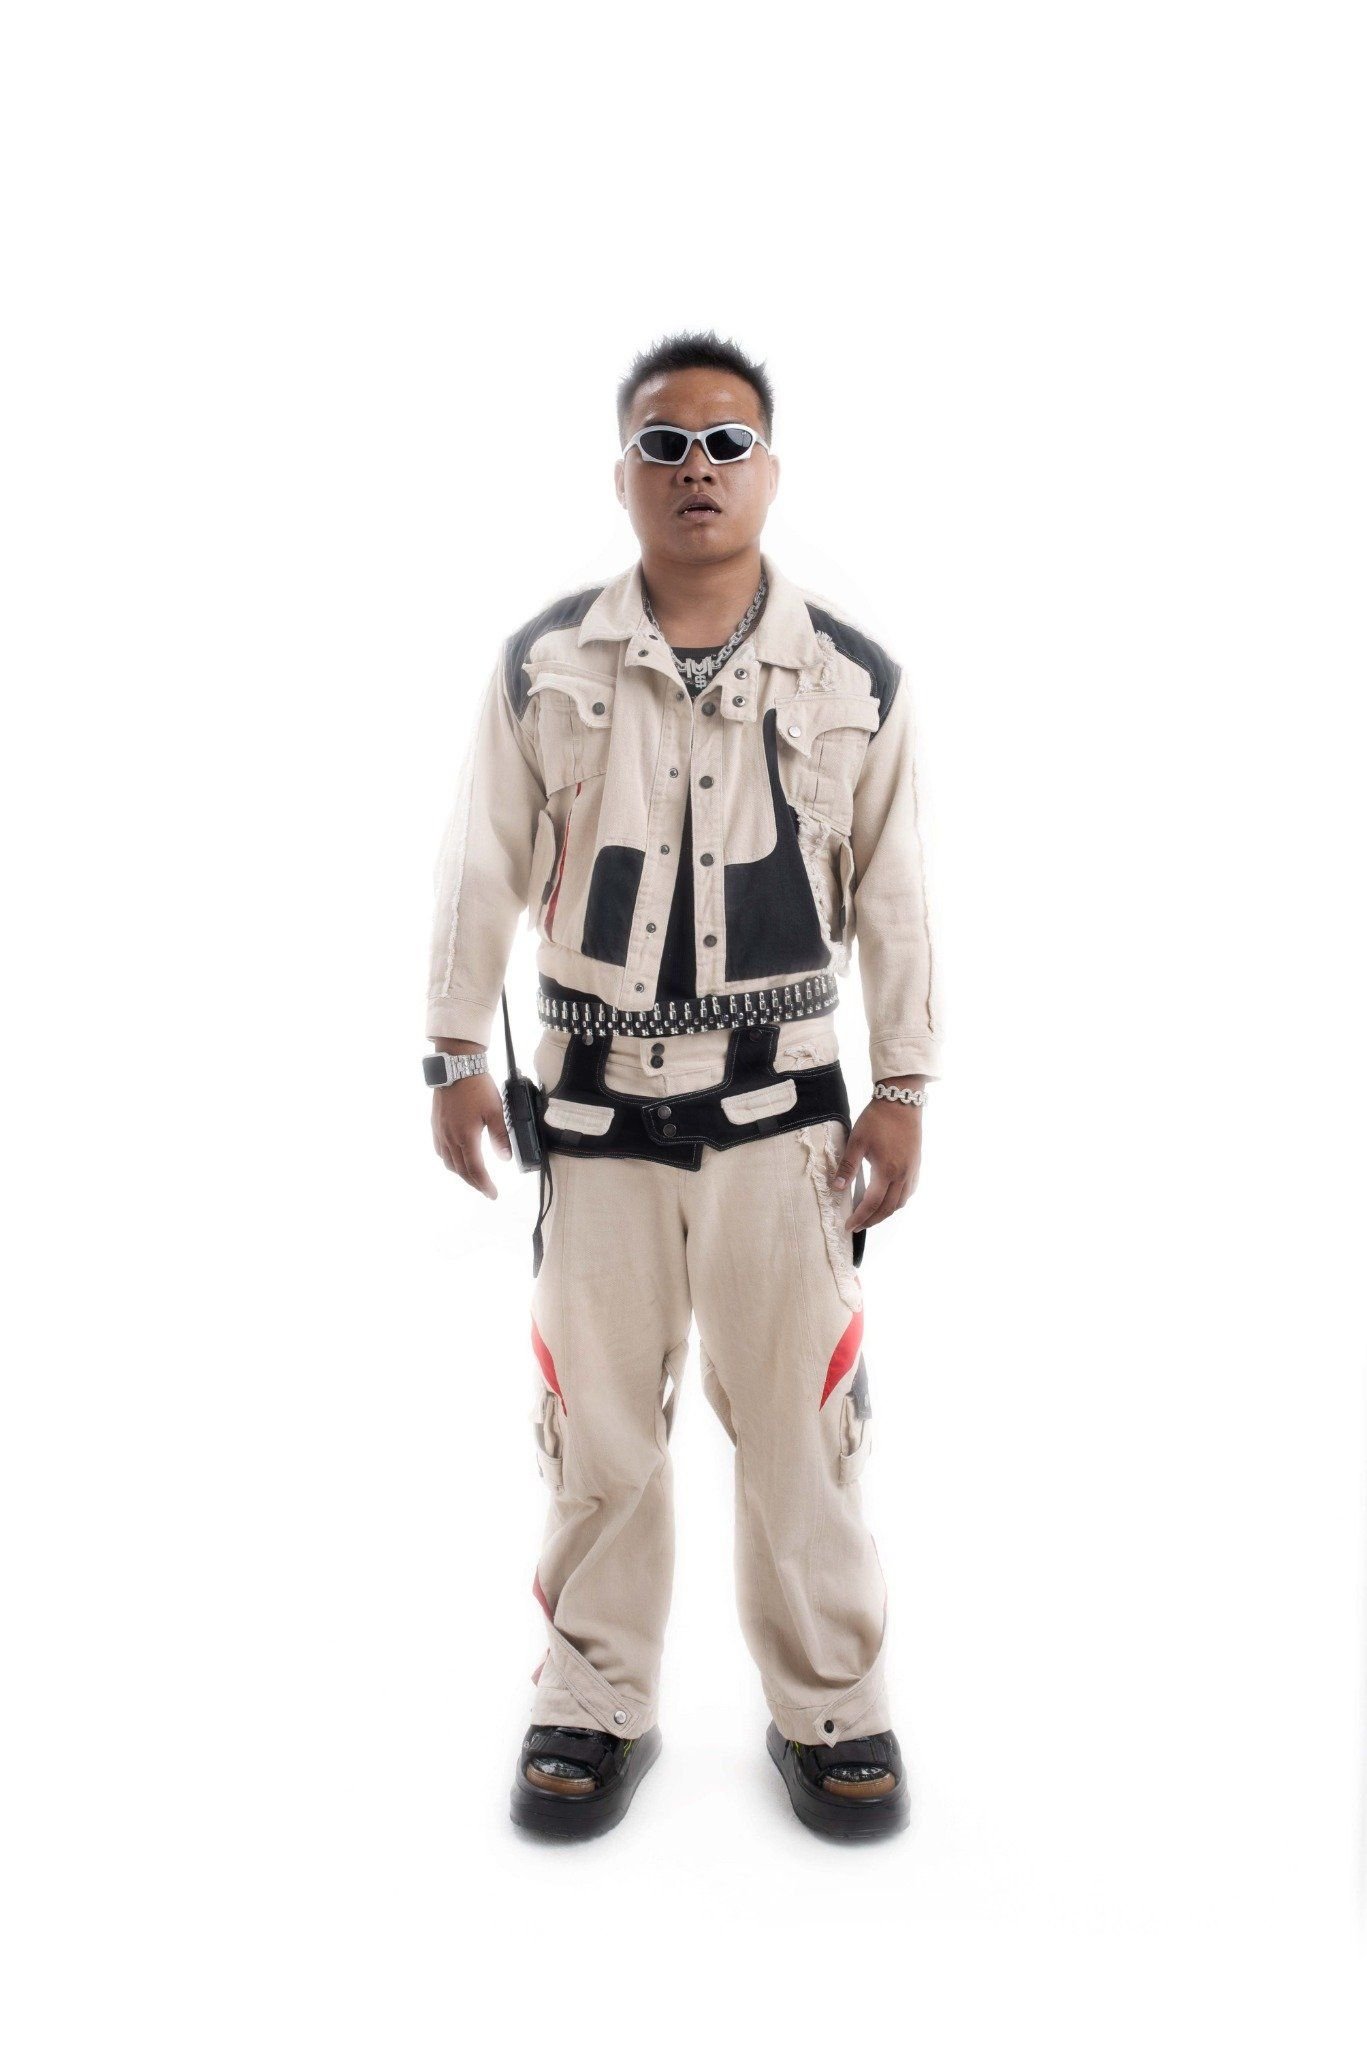  [ Surgery Beige Jacket / Pants ] – Limited Edition (1 Of 1) 